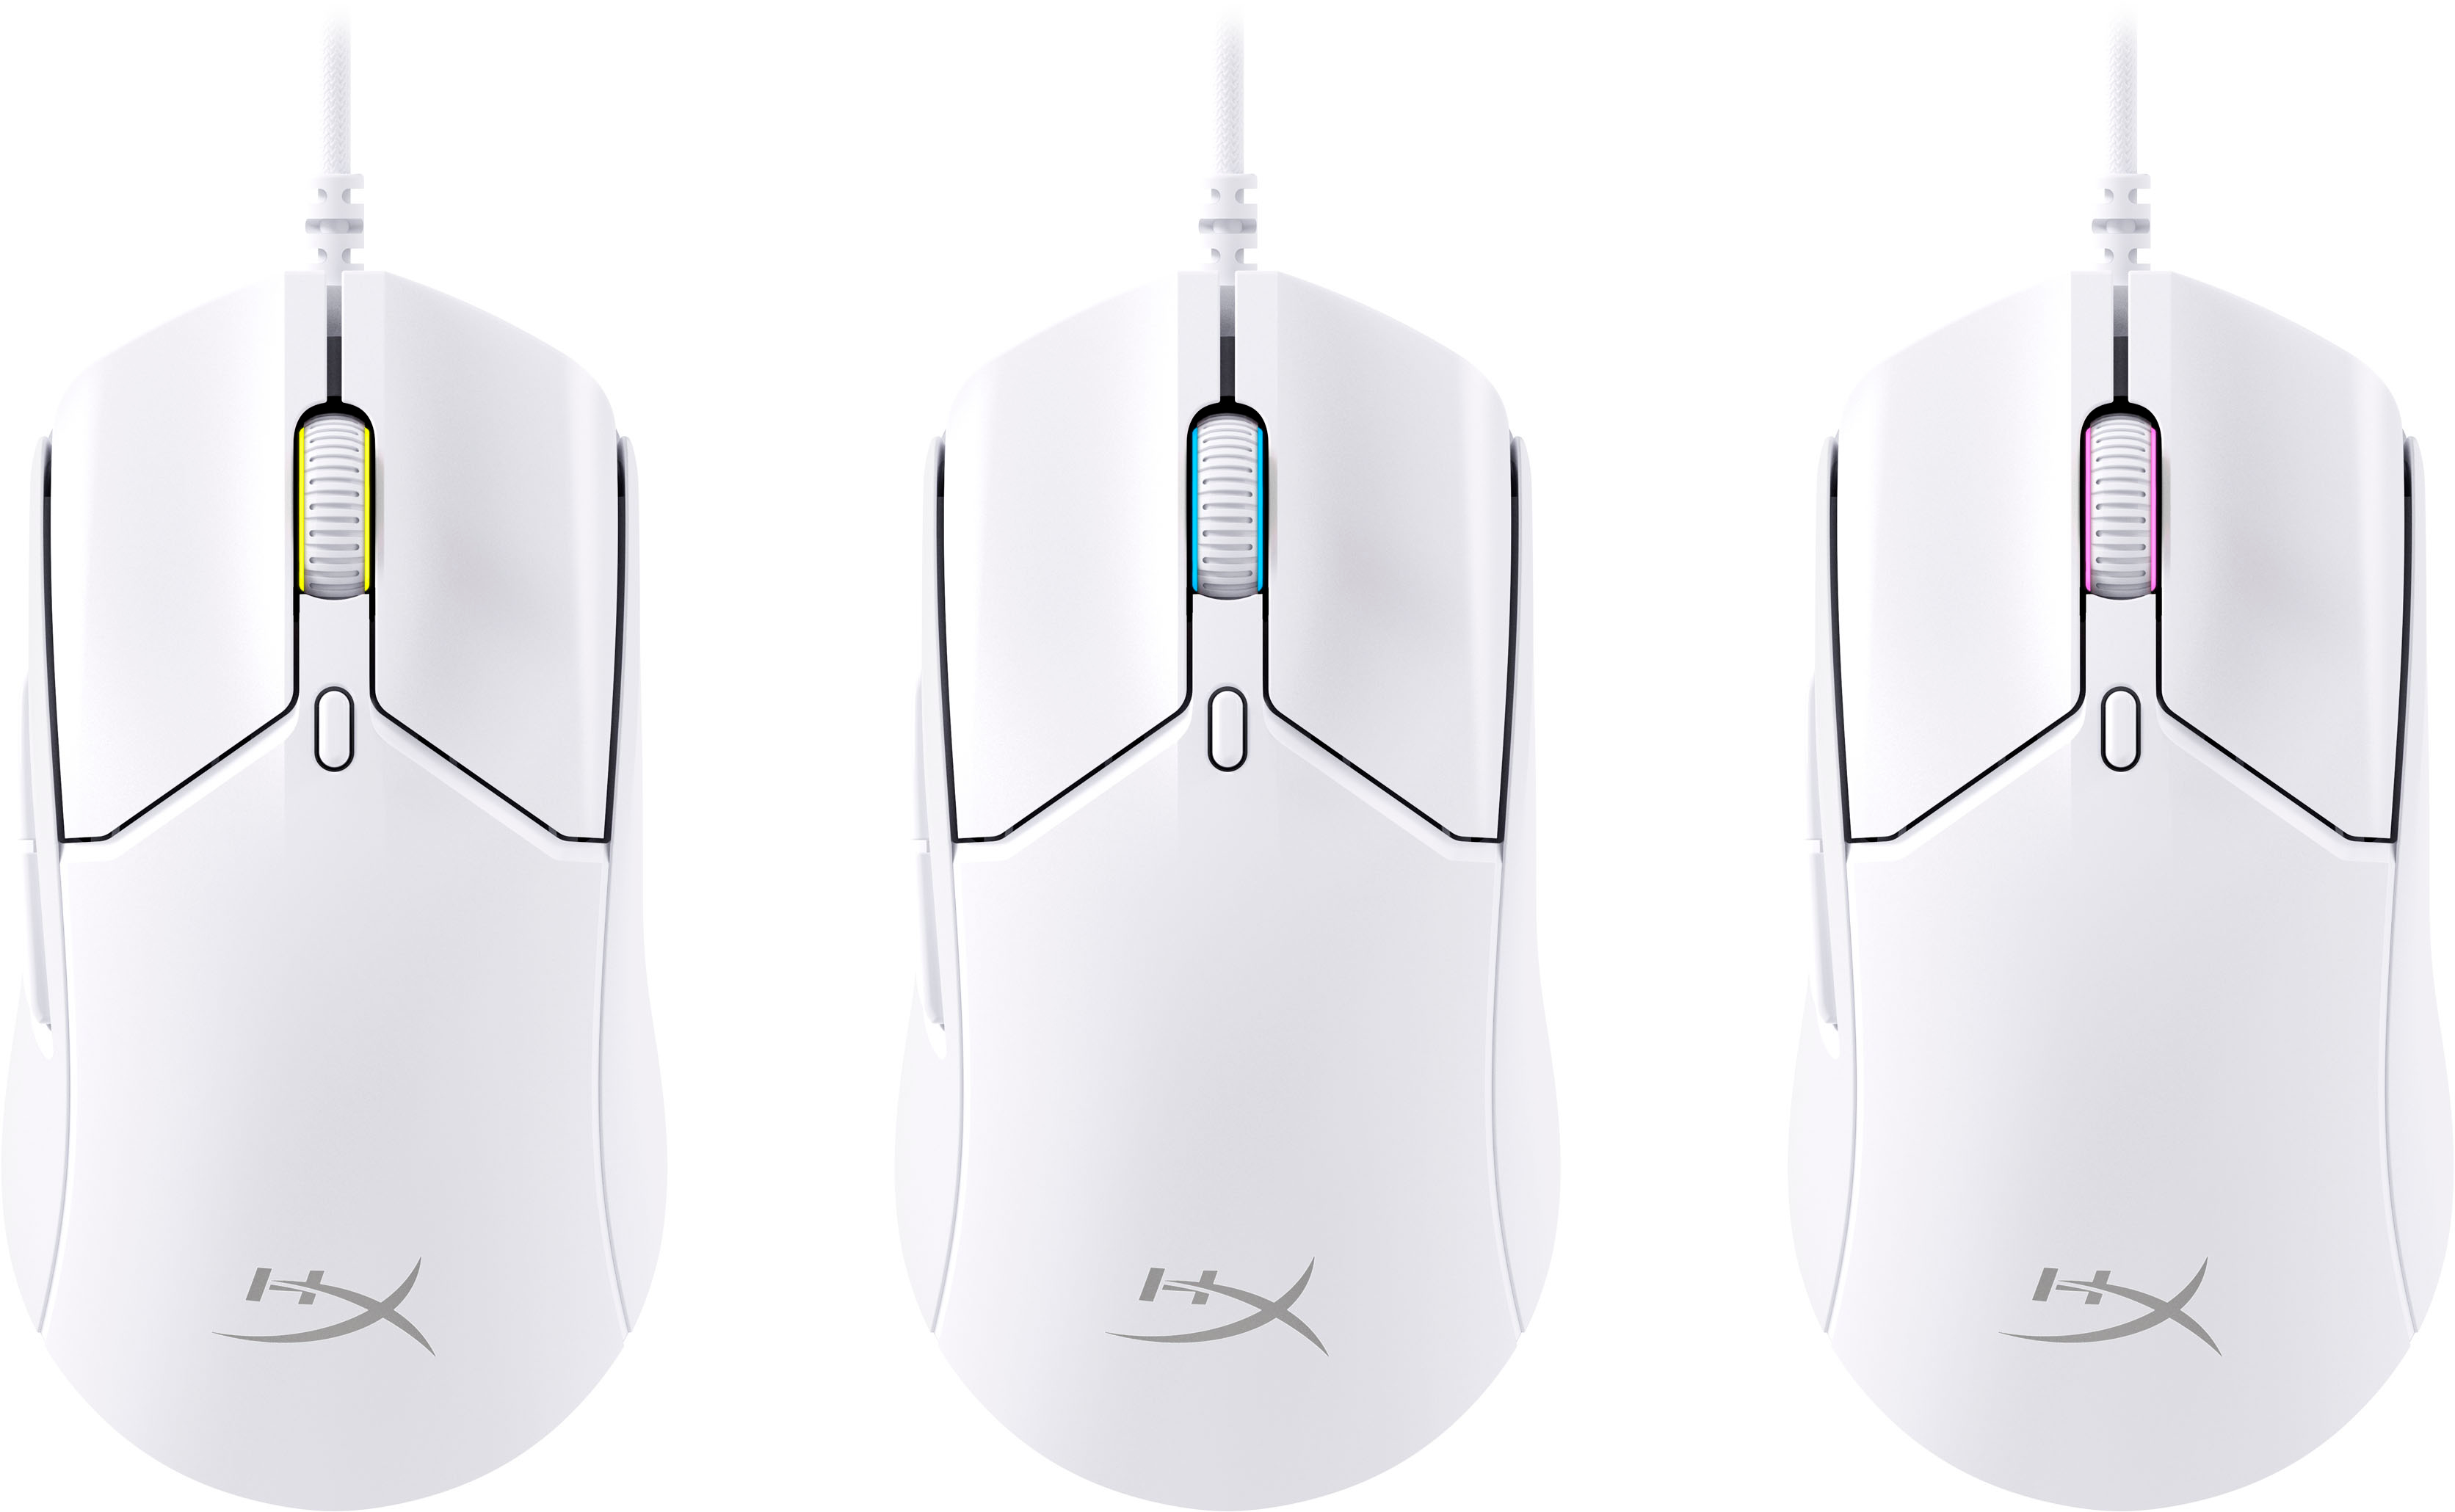 HyperX Pulsefire Haste Buy - RGB 6N0A8AA Wired Lightweight 2 with Lighting White Gaming Optical Best Mouse